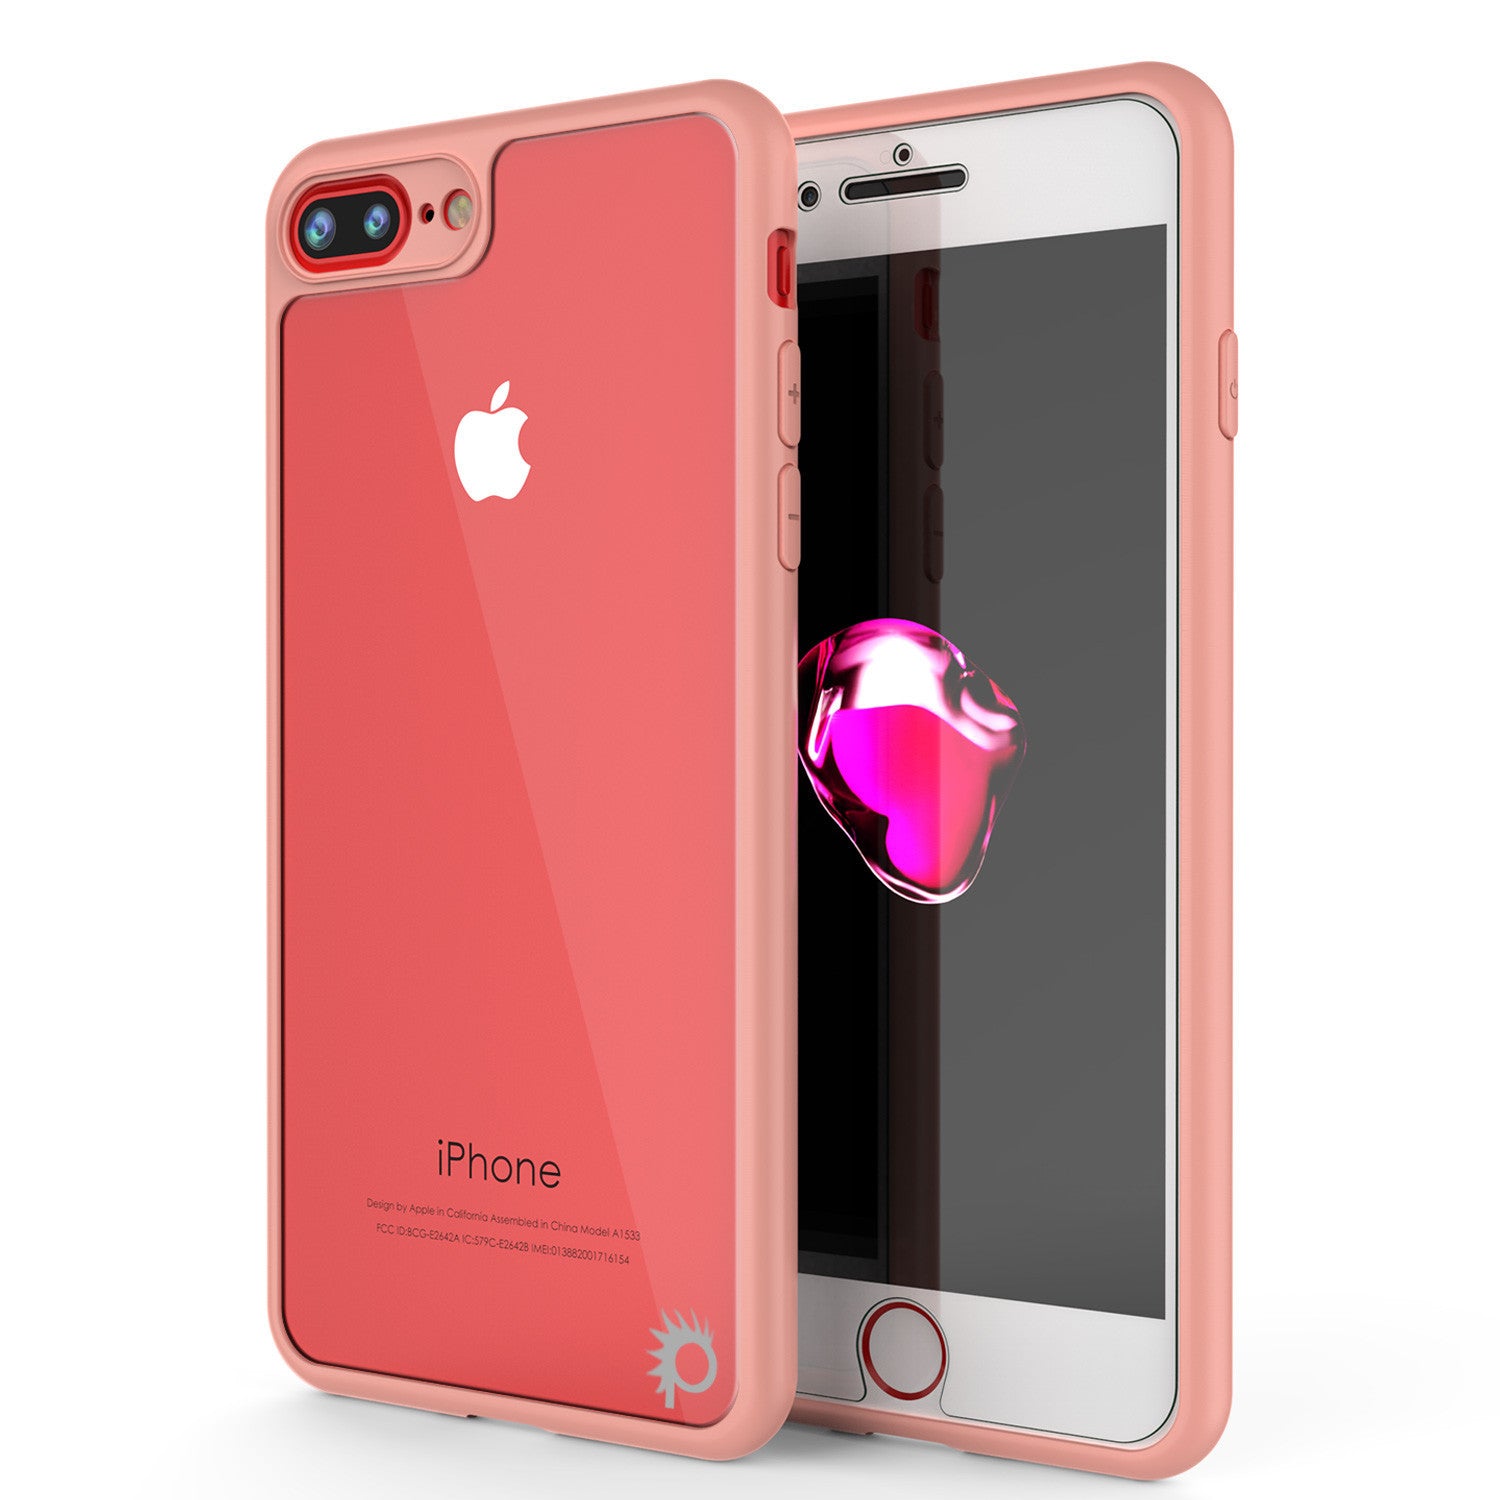 iPhone 7 PLUS Case, Punkcase [MASK Series] [PINK] Full Body Hybrid Dual Layer TPU Cover protective Tempered Glass Screen Protector